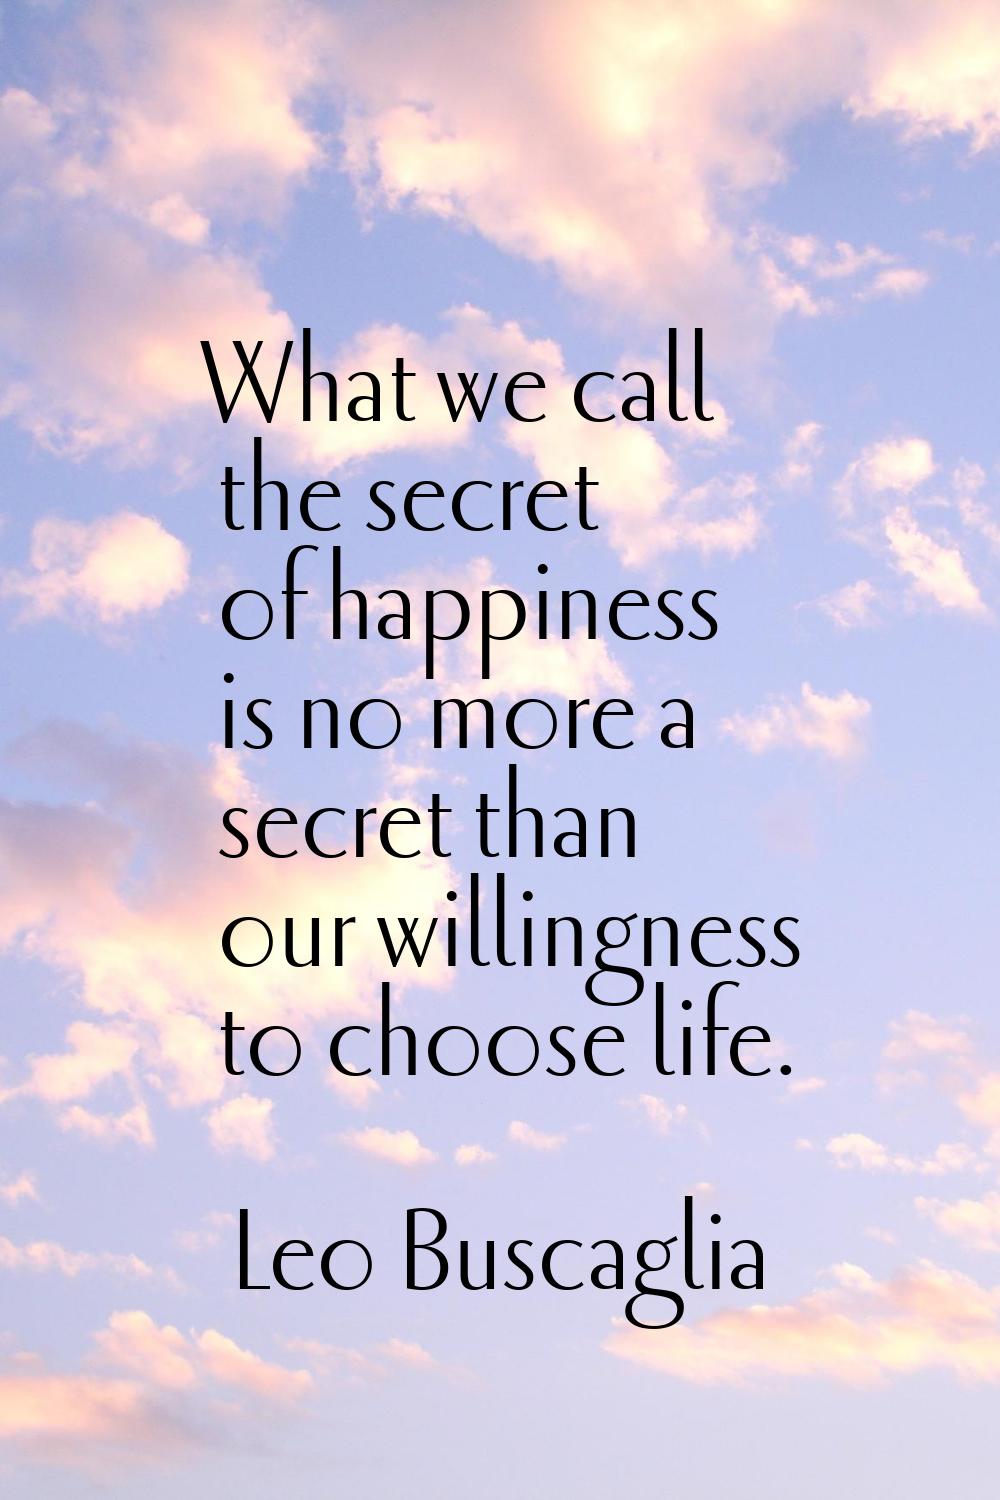 What we call the secret of happiness is no more a secret than our willingness to choose life.